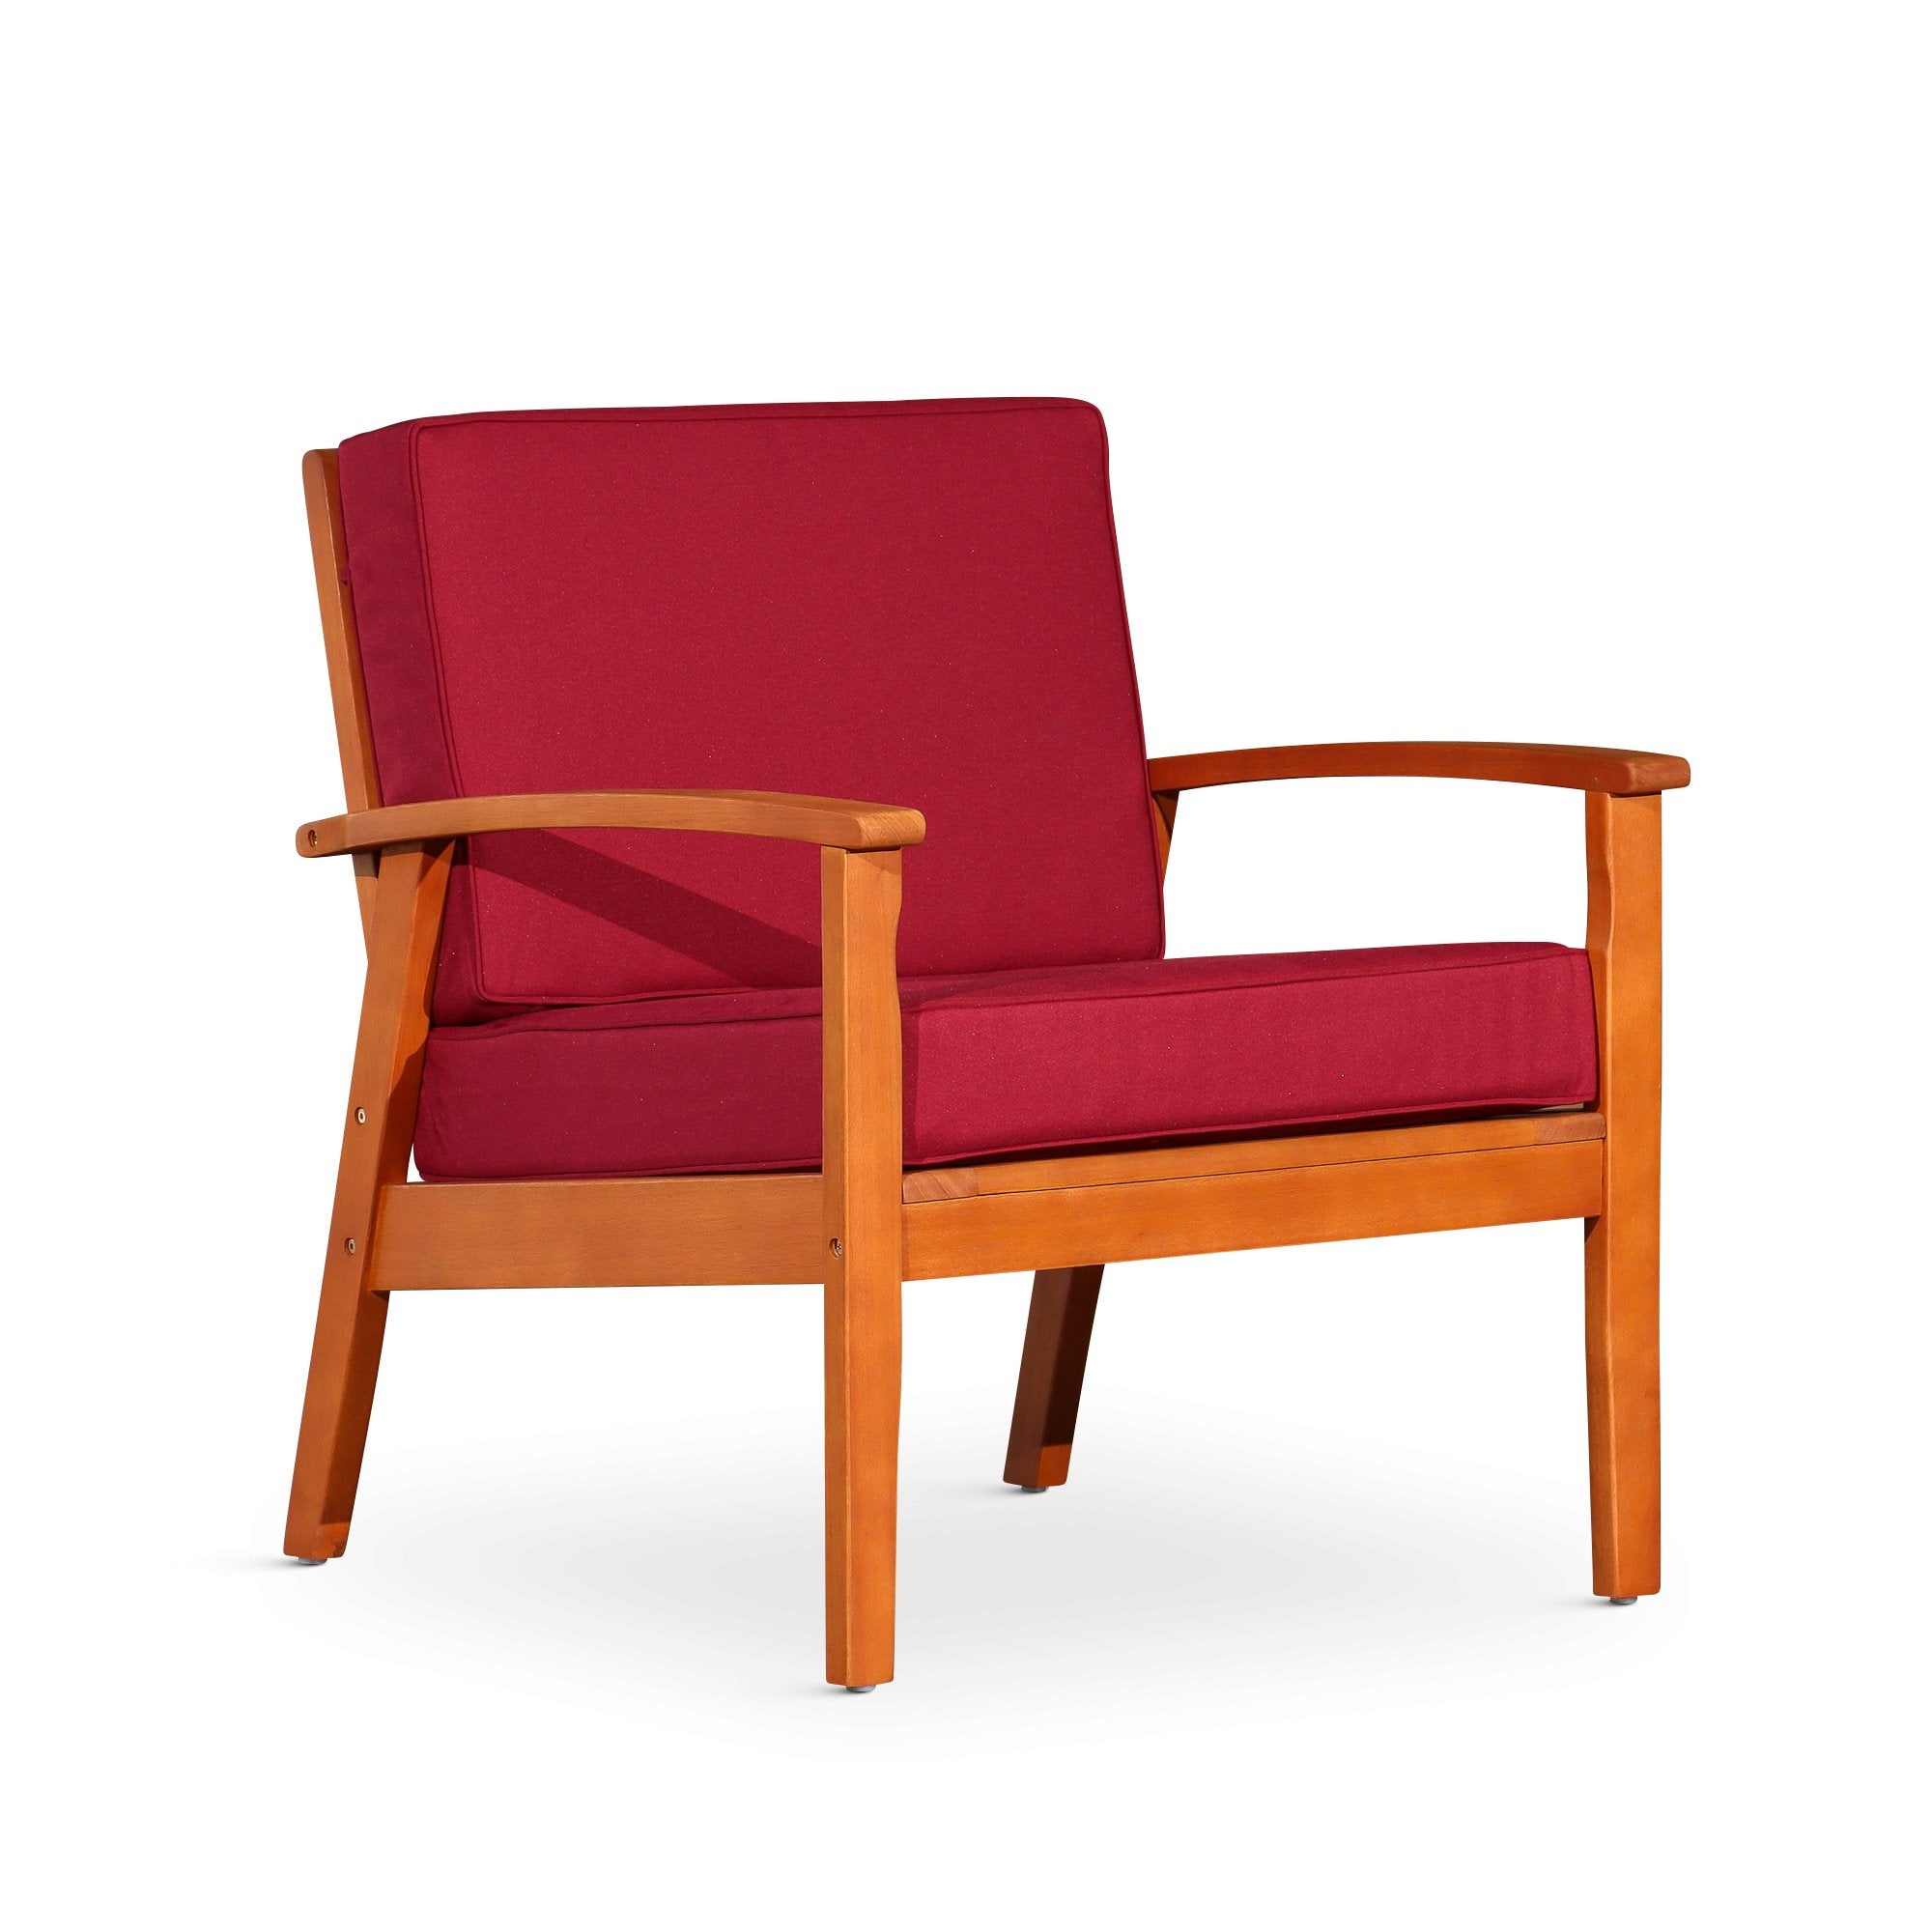 Deep-Seat-Outdoor-Chair,-Natural-Oil-Finish,-Burgundy-Cushions-Outdoor-Chairs